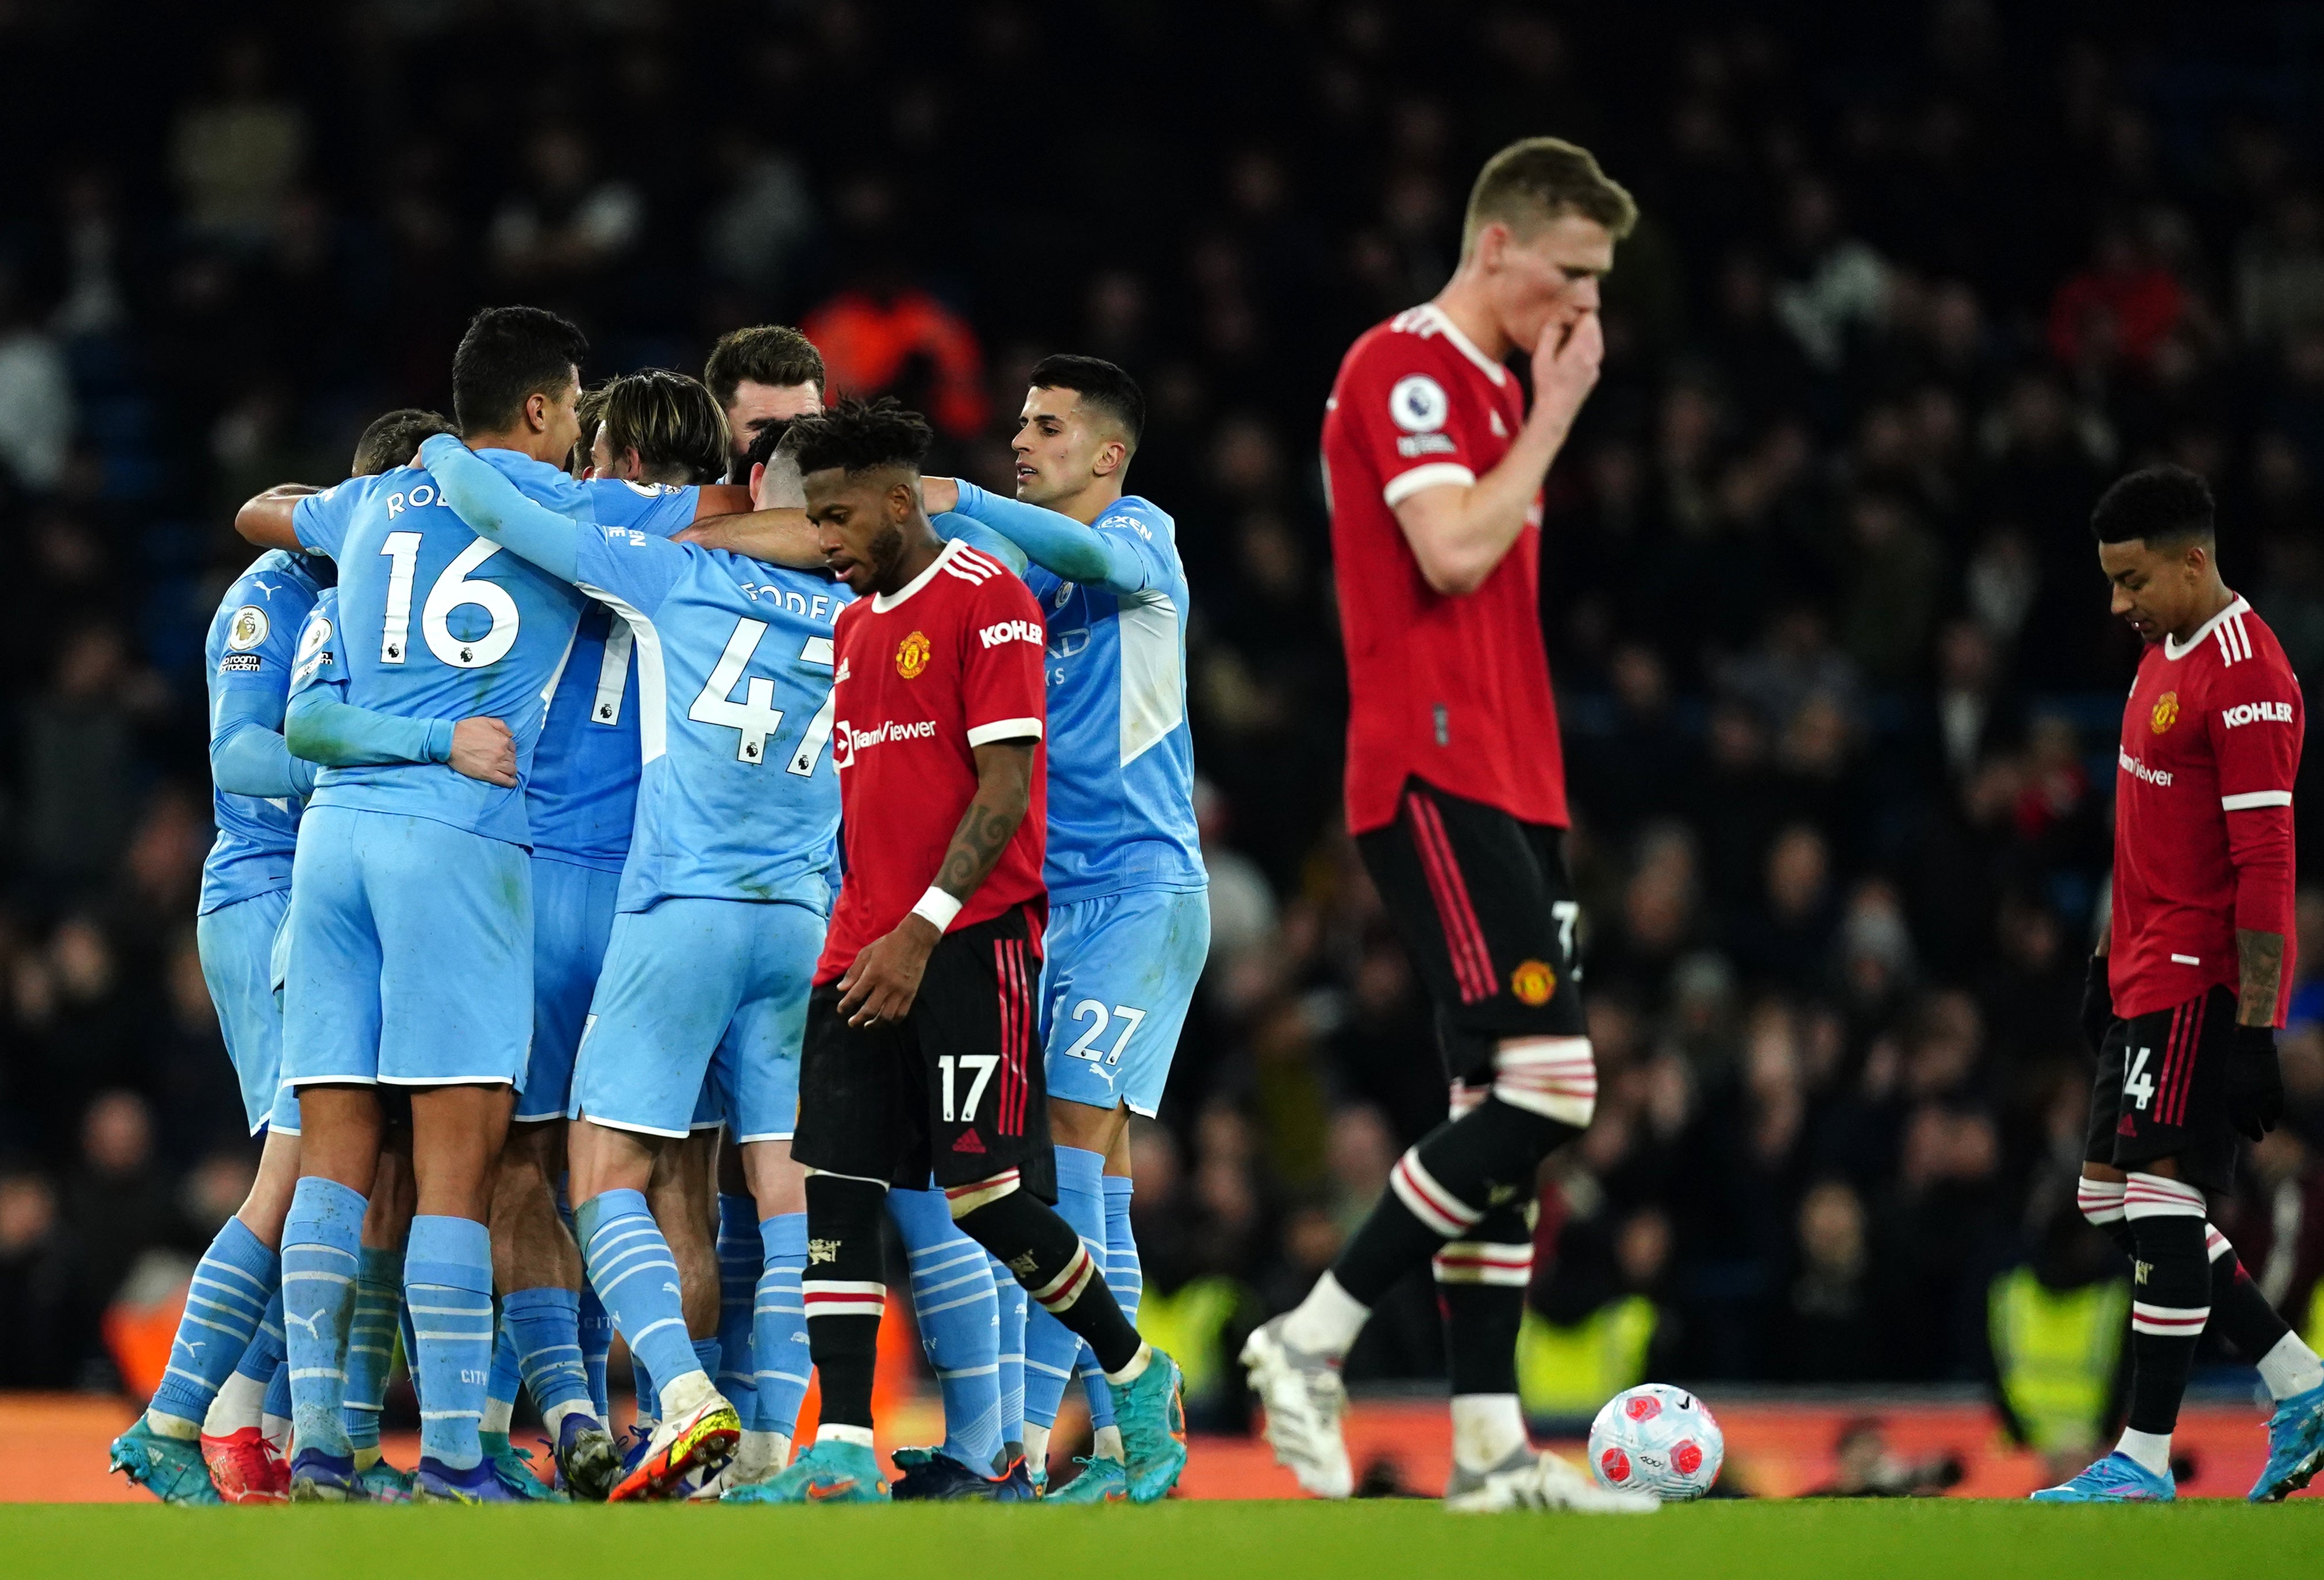 Manchester United’s despair is apparent as Man City celebrate their fourth goal